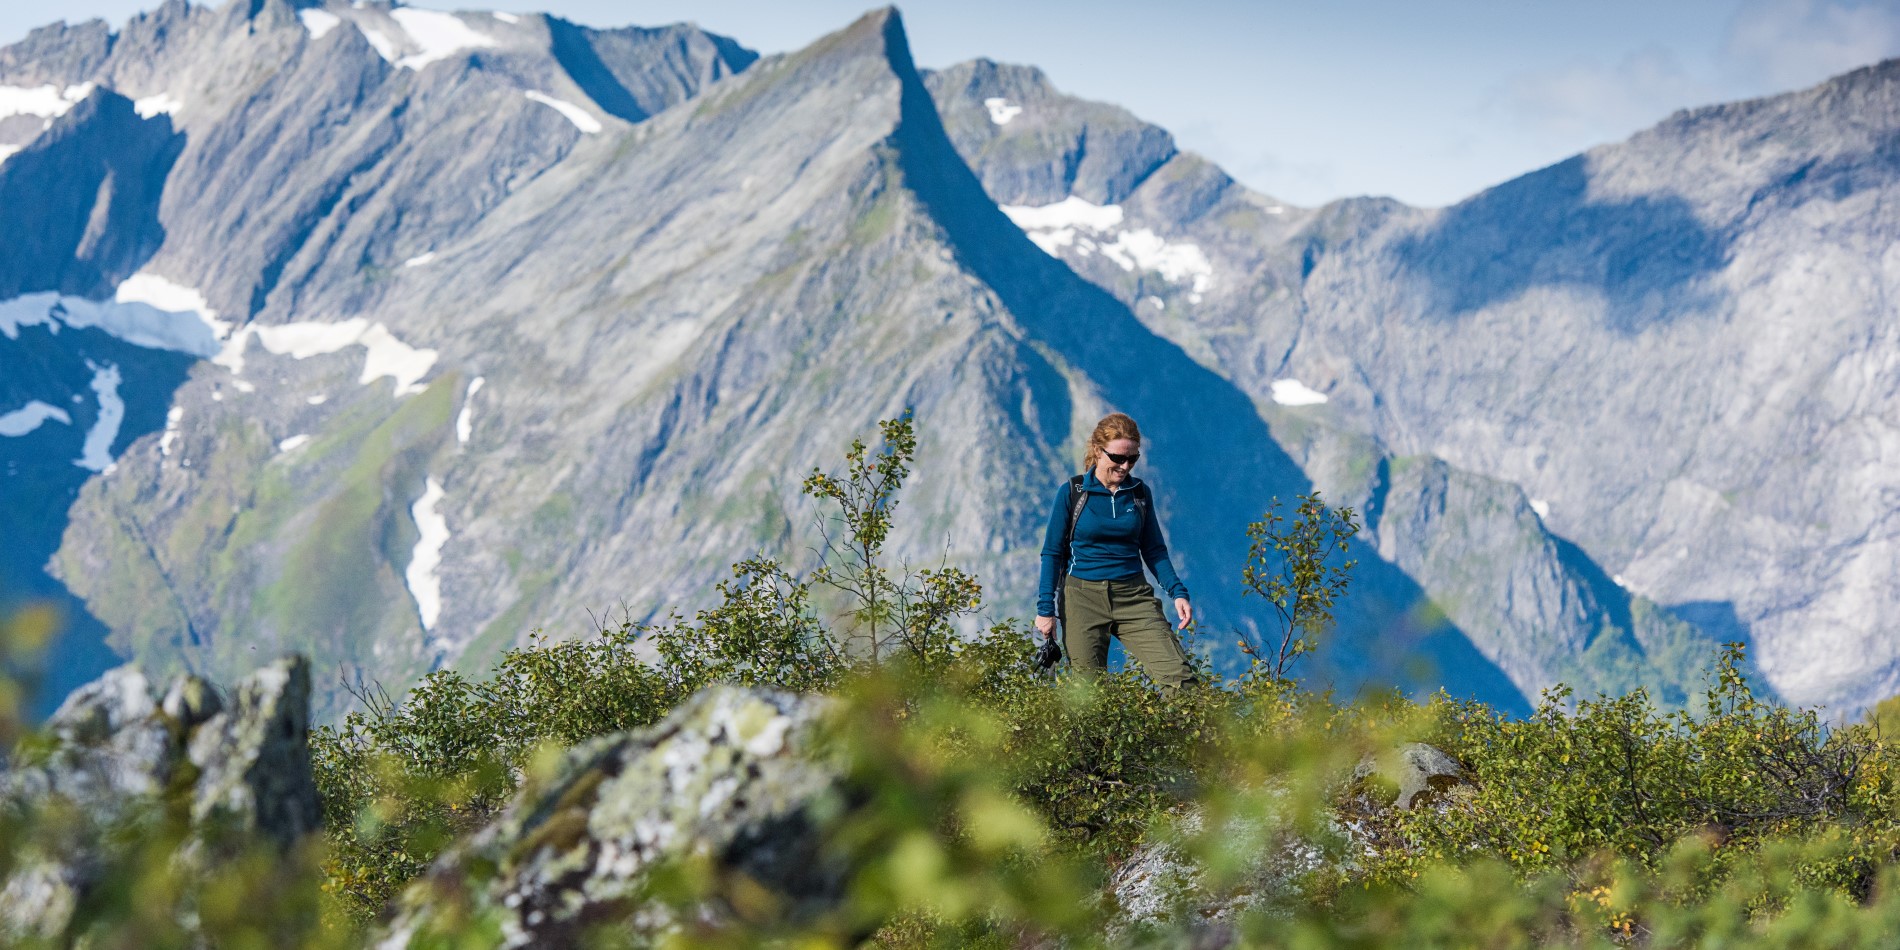 Girl hiking in Hjørundfjorden, Norway. She is surrounded by high mountain peaks